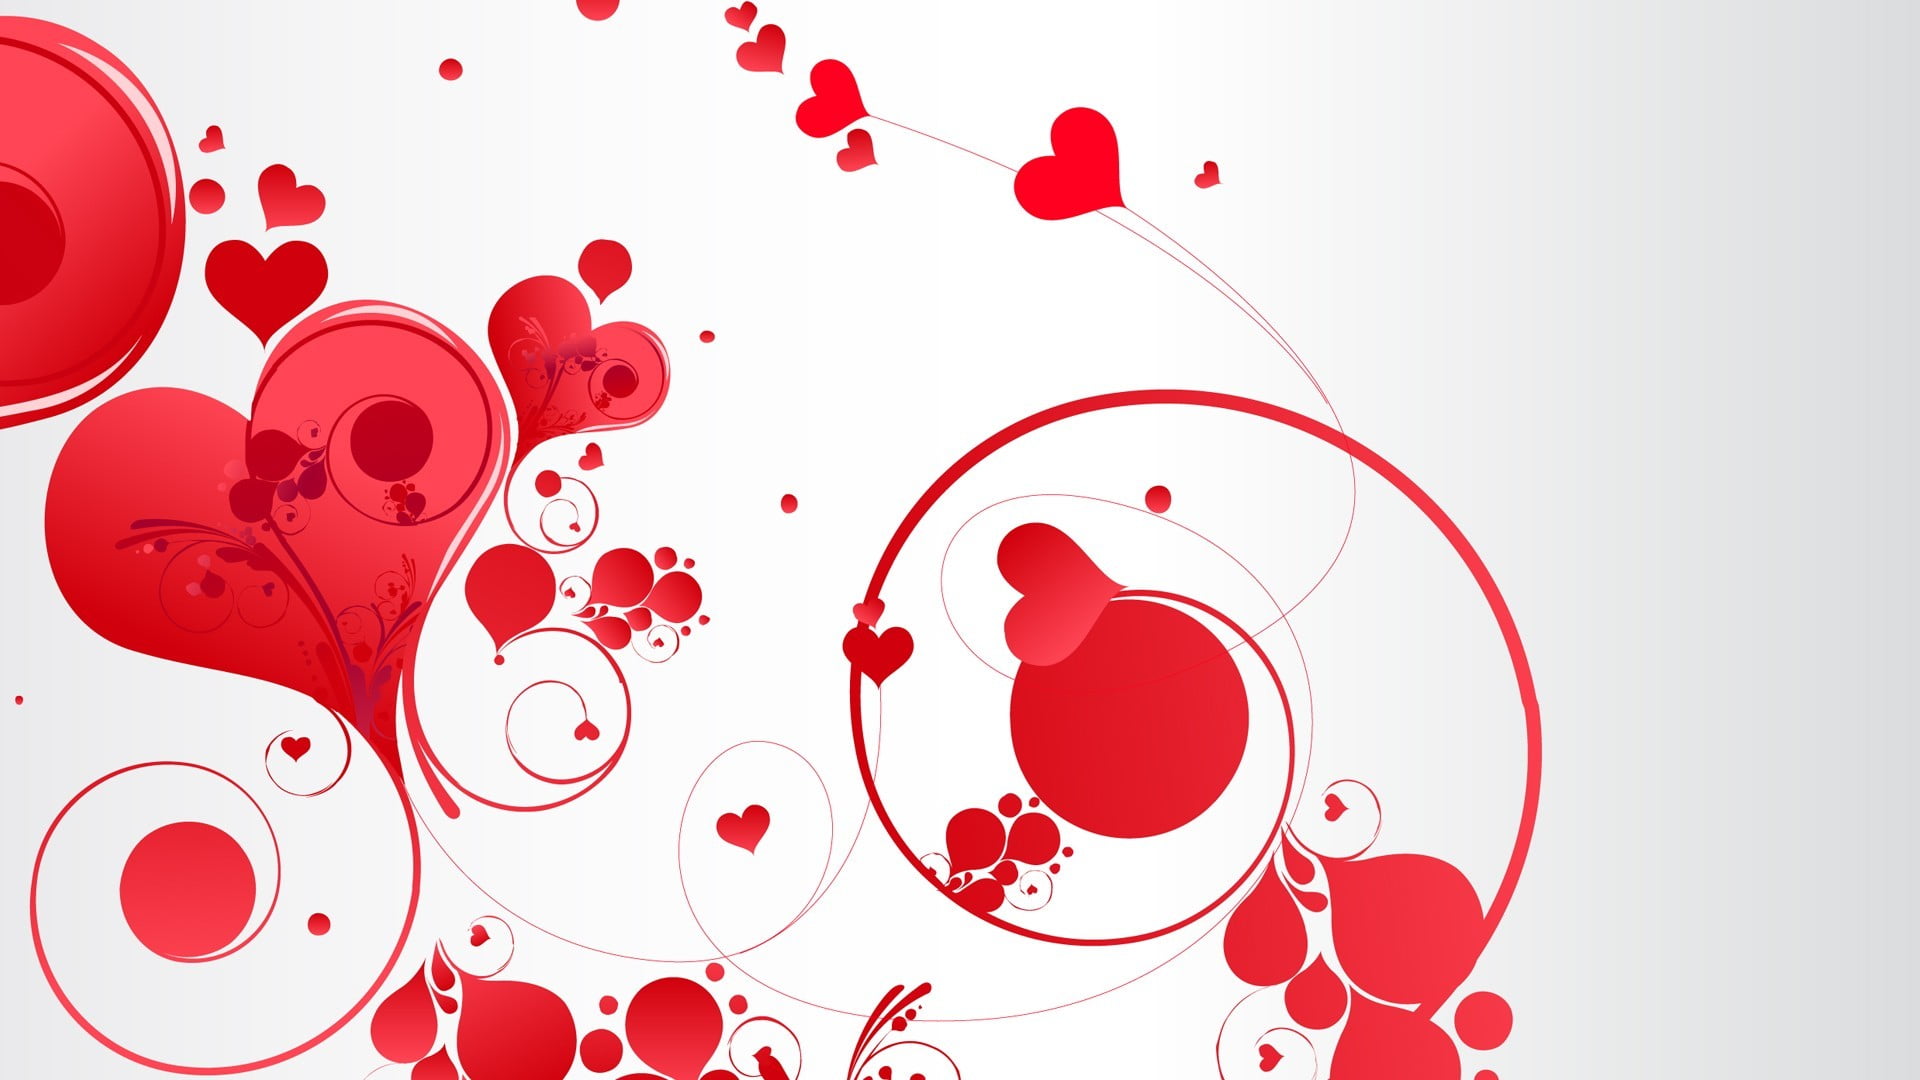 Abstract Romantic Red White Hearts Background White Heart Background Images